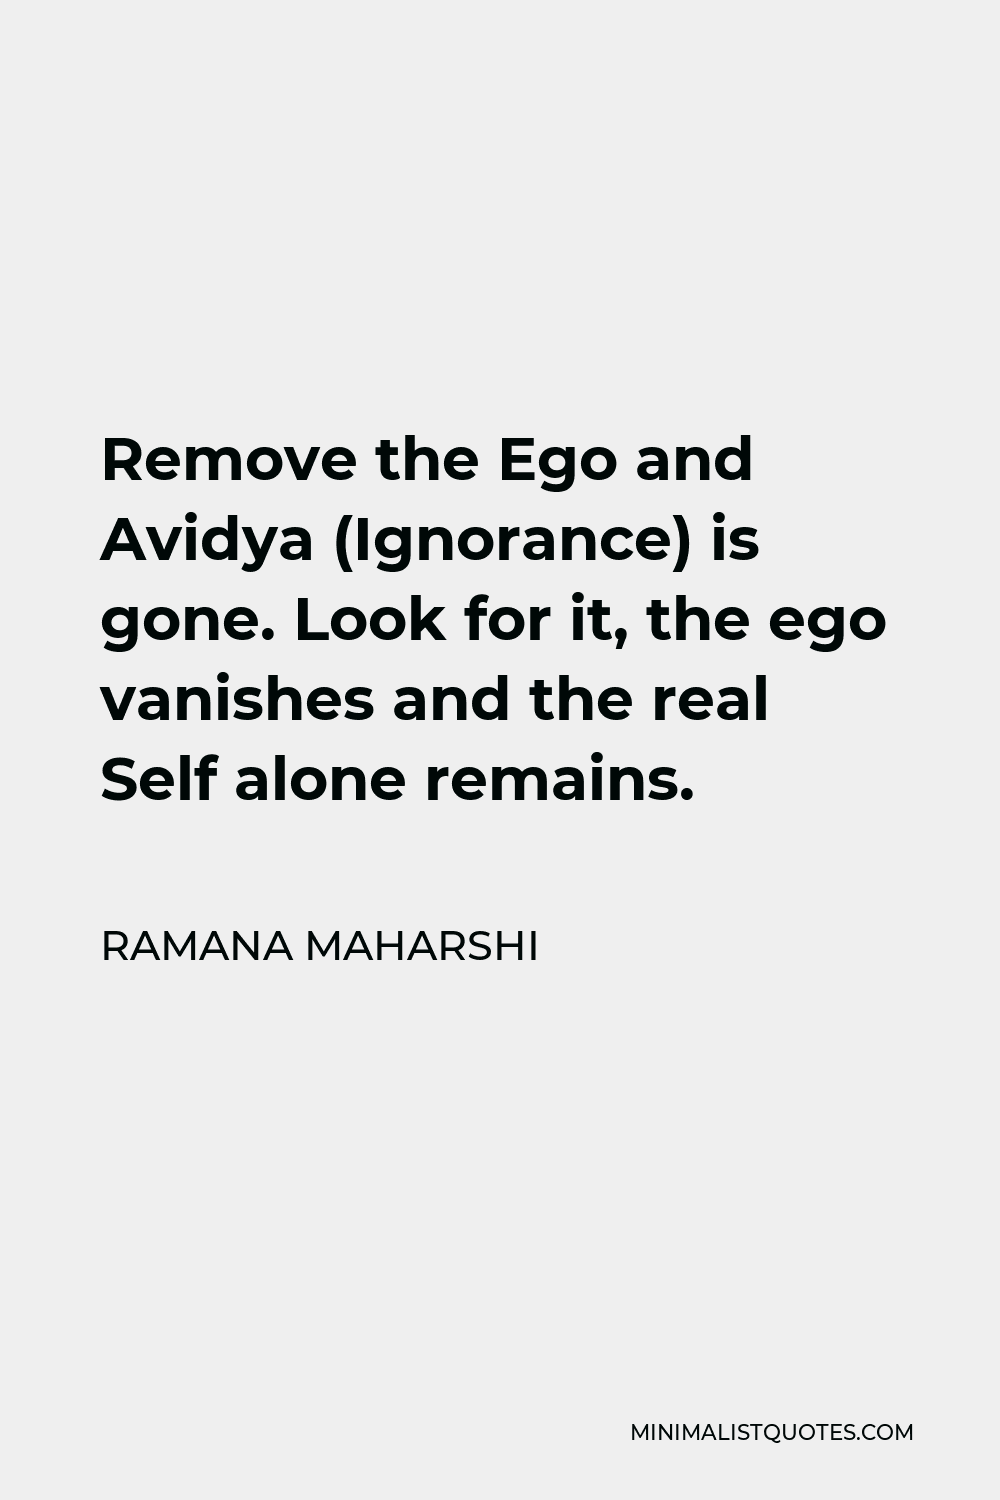 Ramana Maharshi Quote - Remove the Ego and Avidya (Ignorance) is gone. Look for it, the ego vanishes and the real Self alone remains.